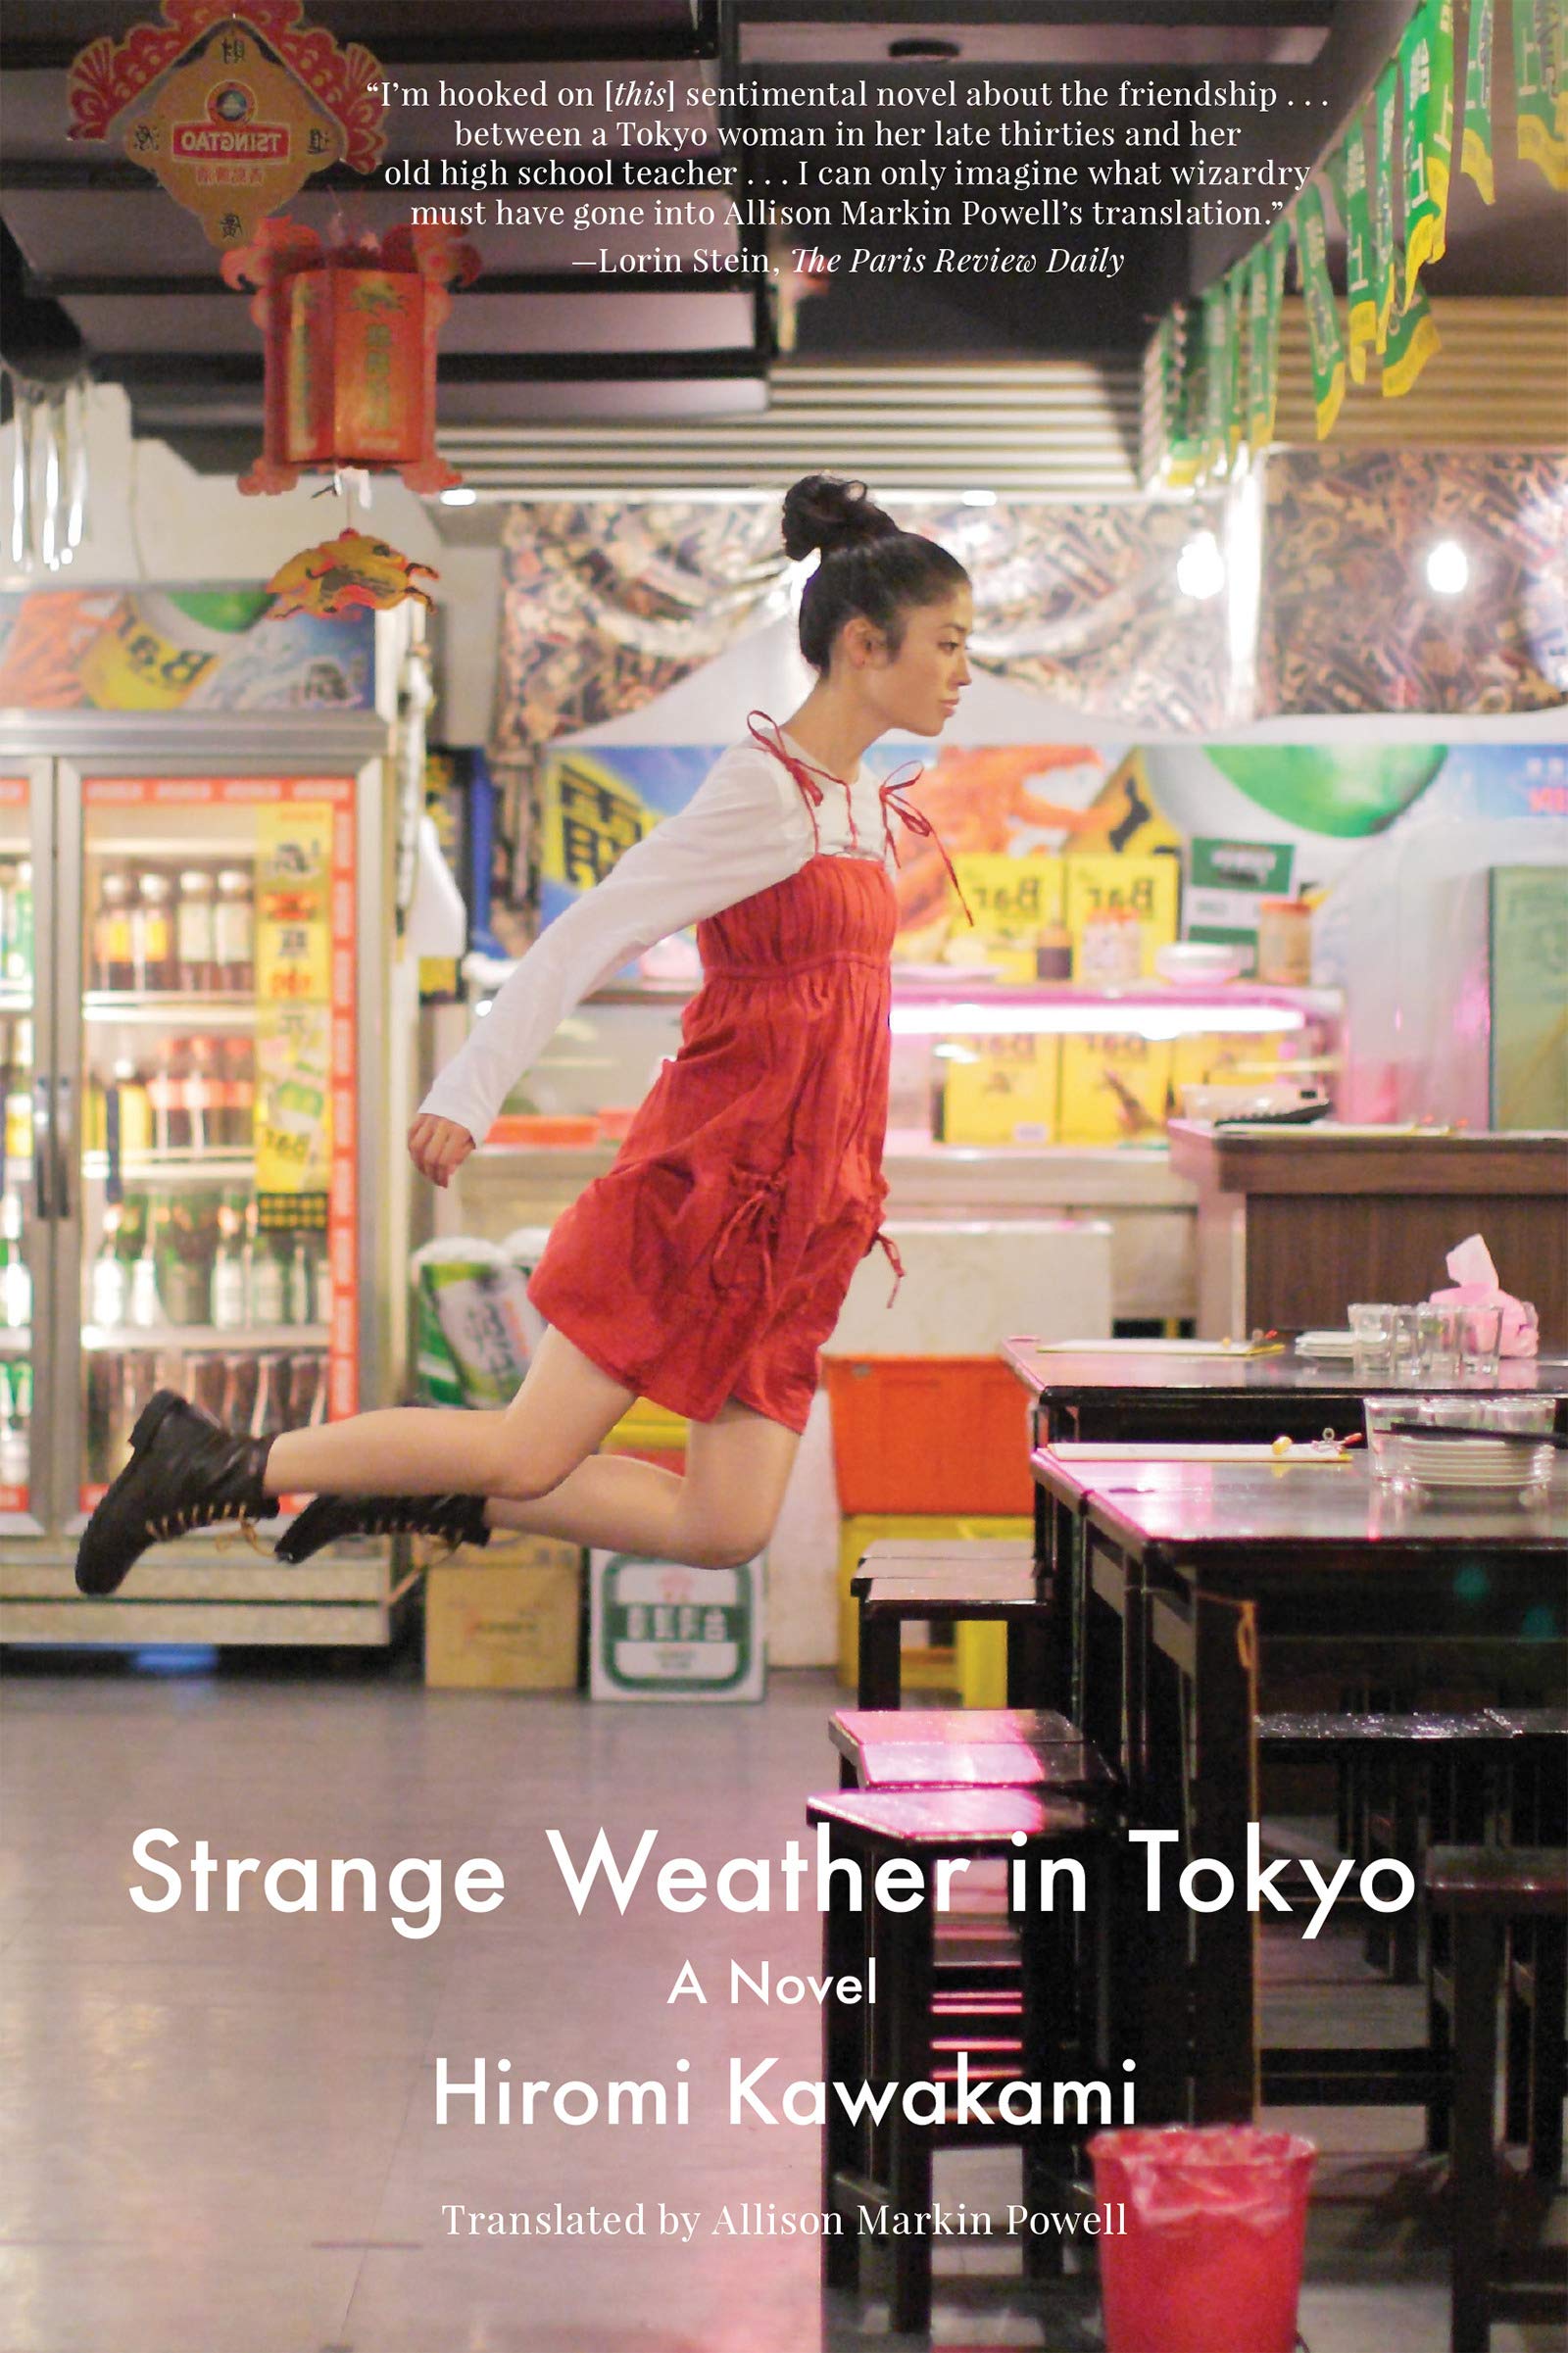 strange-weather-in-tokyo-book-cover